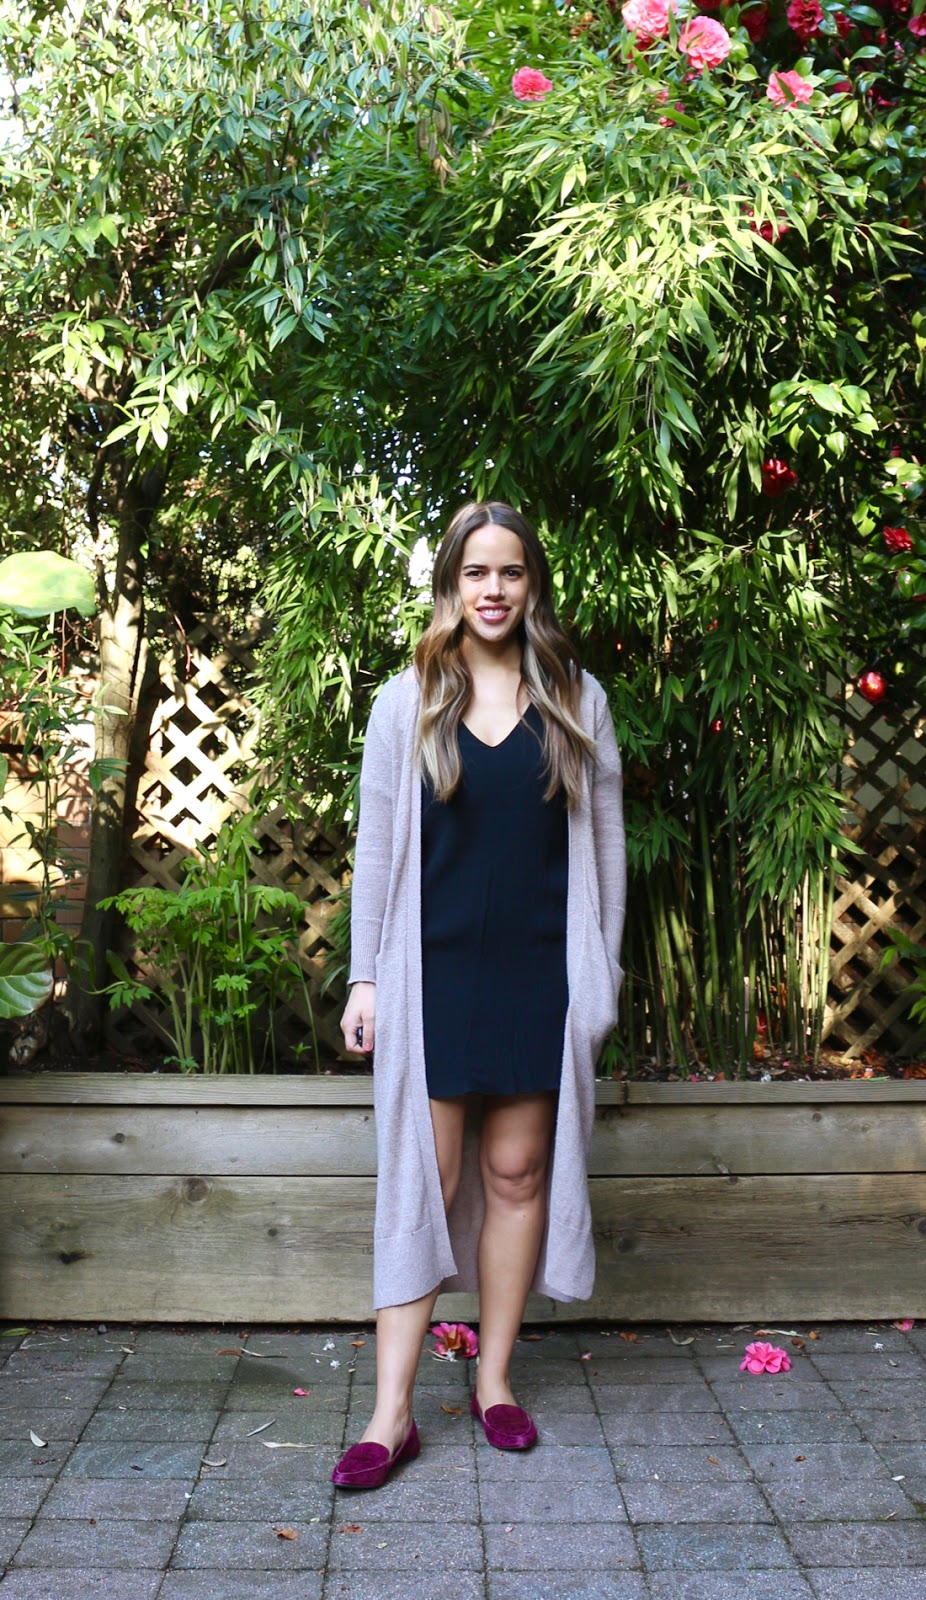 Jules in Flats - Black Shift Dress with Duster Cardigan (Business Casual Spring Workwear on a Budget)